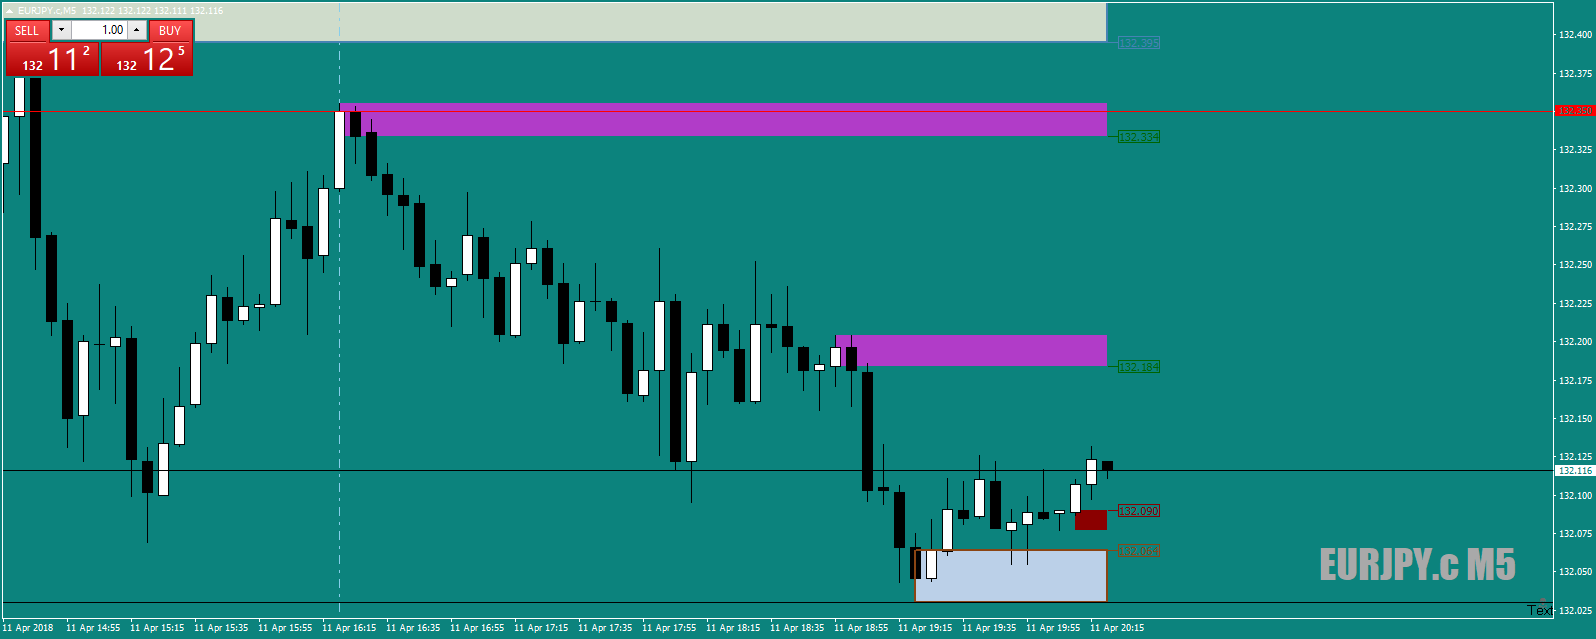 EURJPY.cM5infoforhteEJ-SurfIncAdd-InAndPotentialExit11thApril18.png